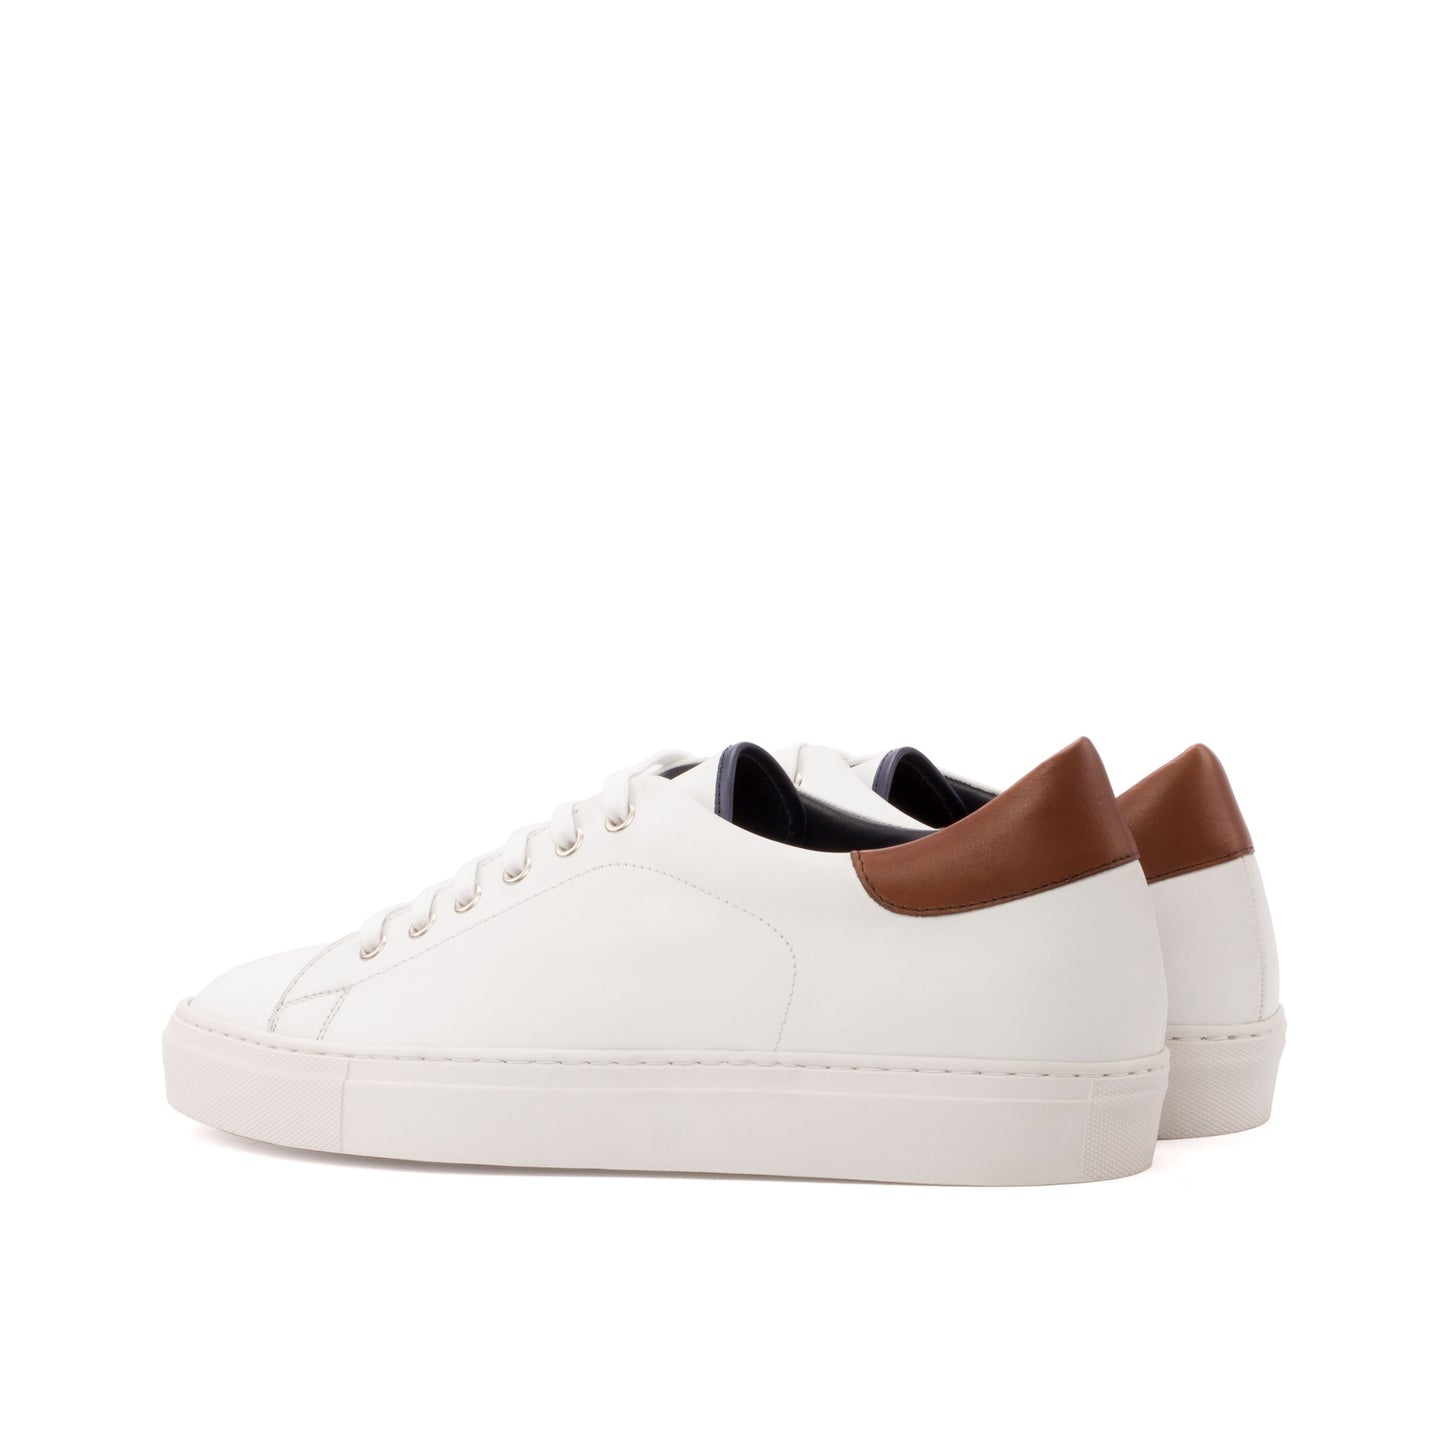 Sneaker white brown leather